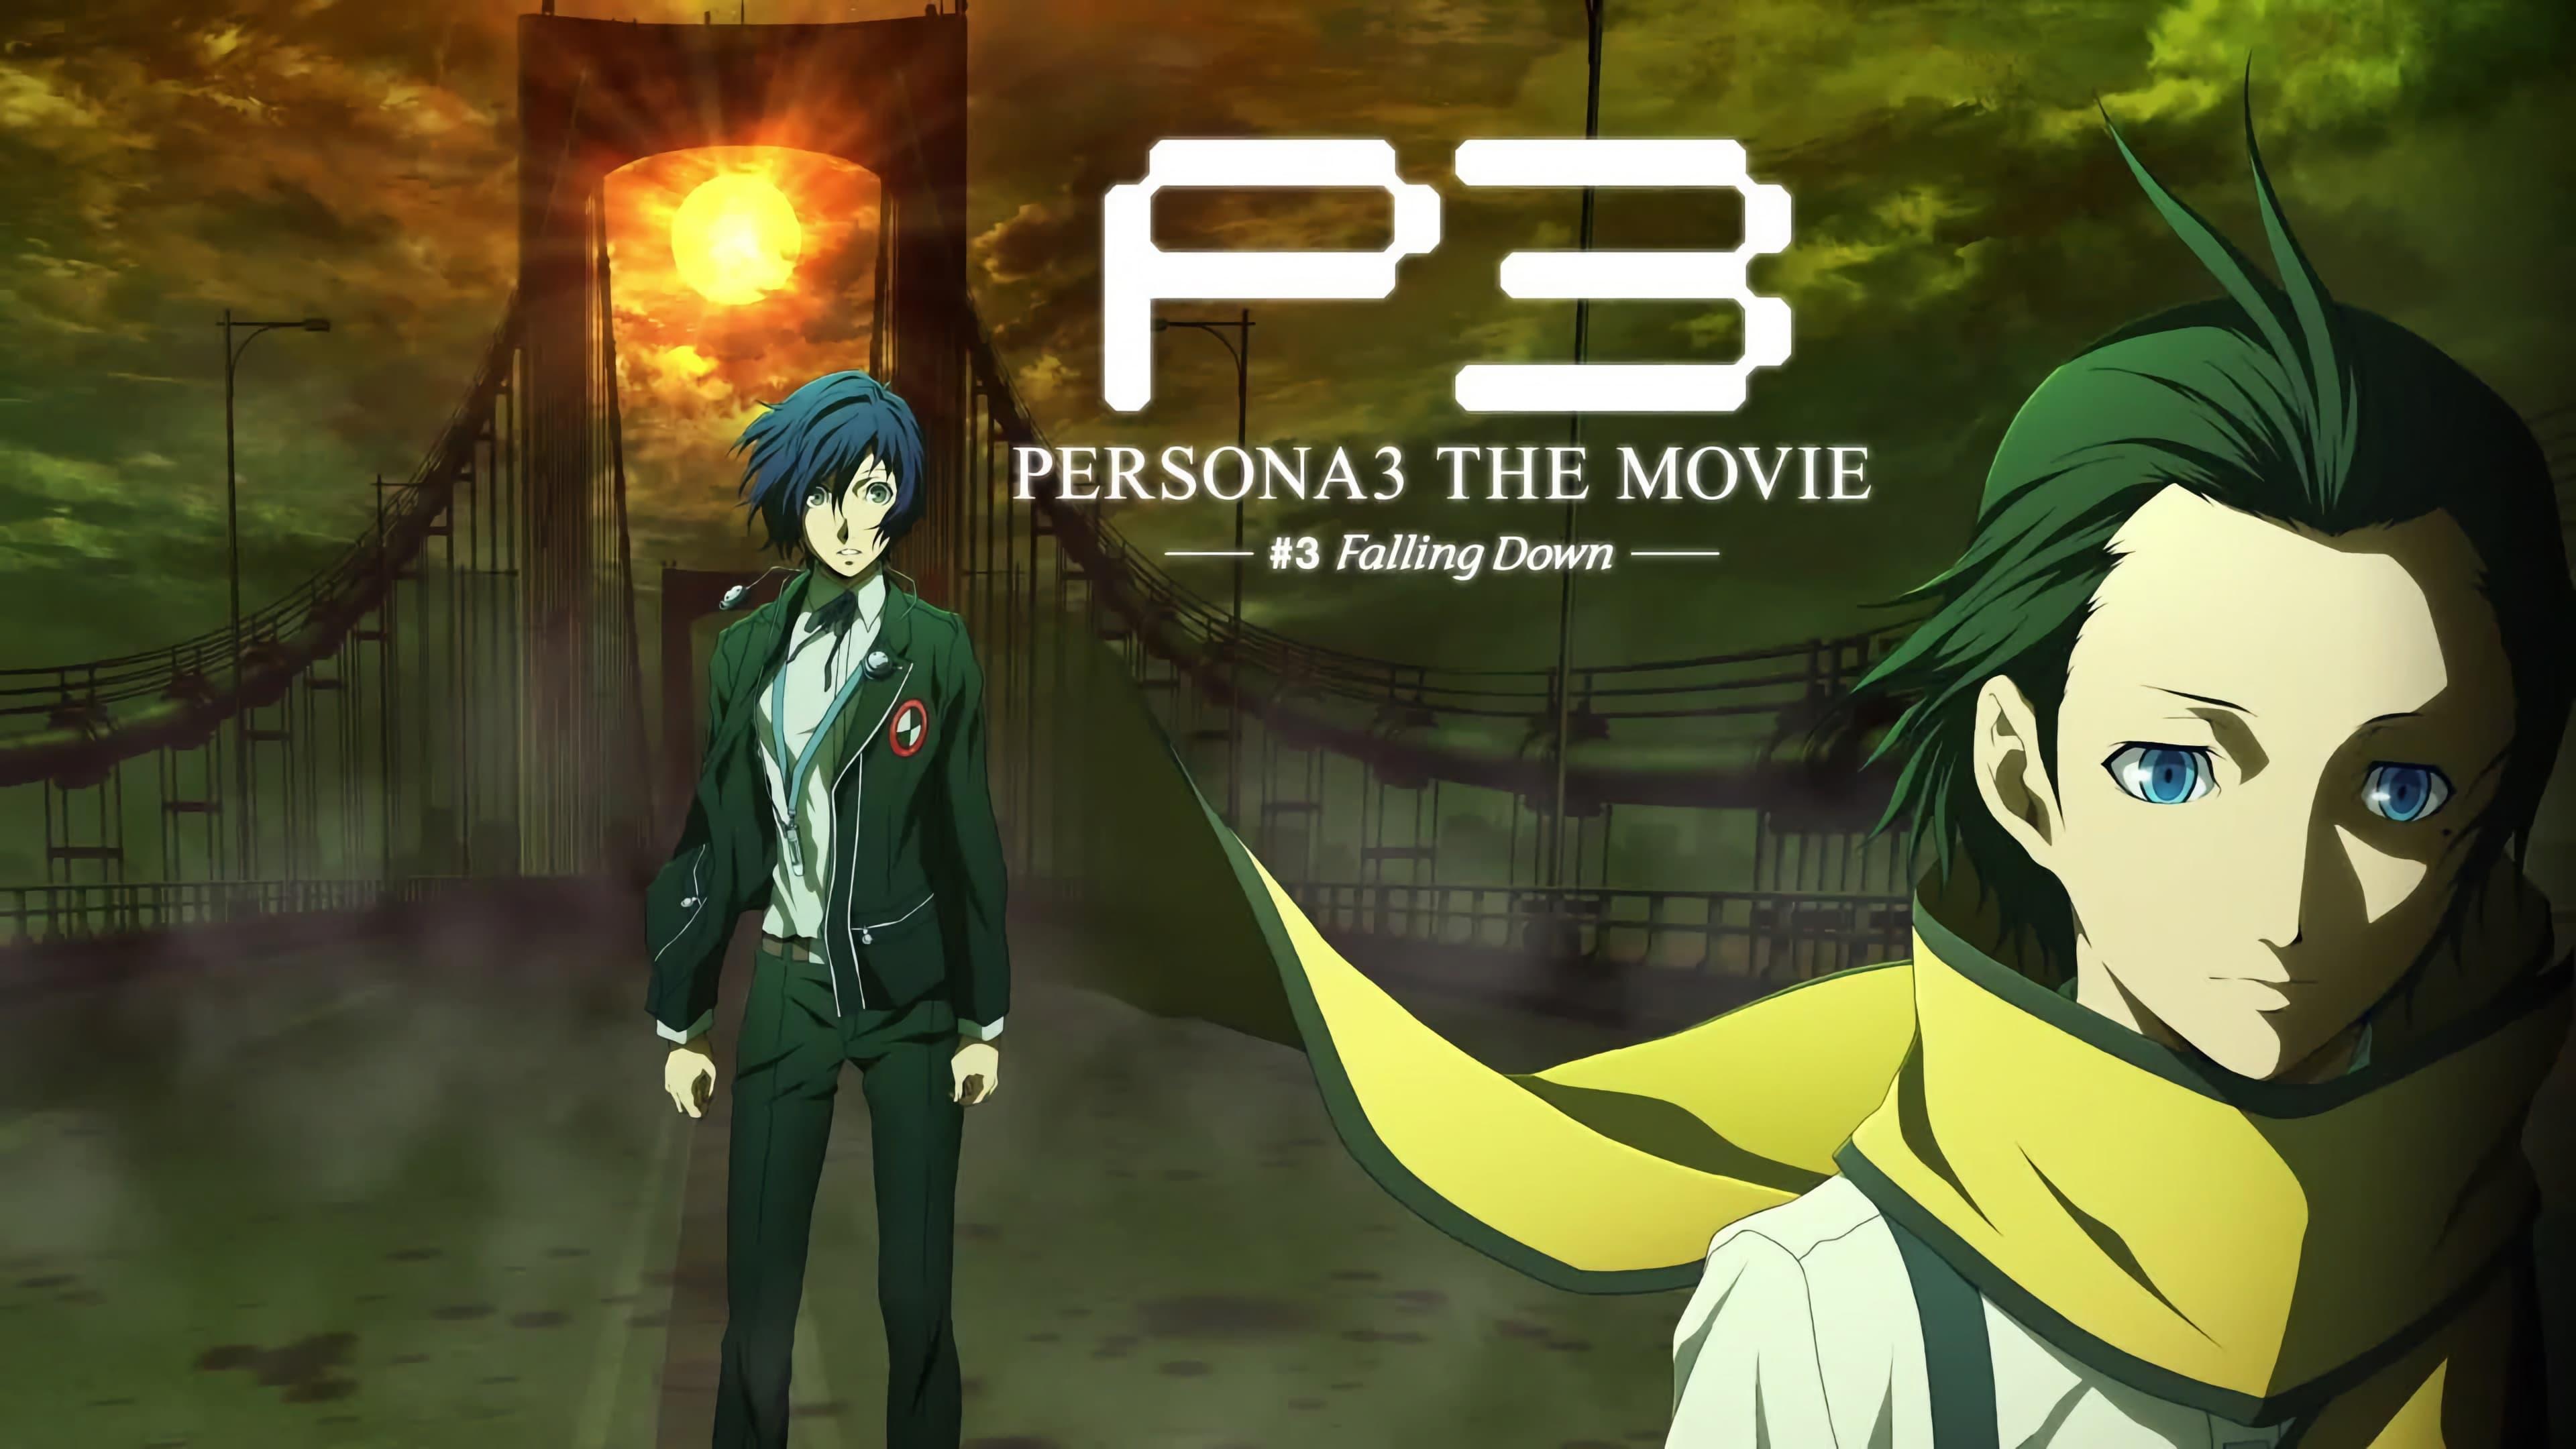 PERSONA3 THE MOVIE #3 Falling Down backdrop